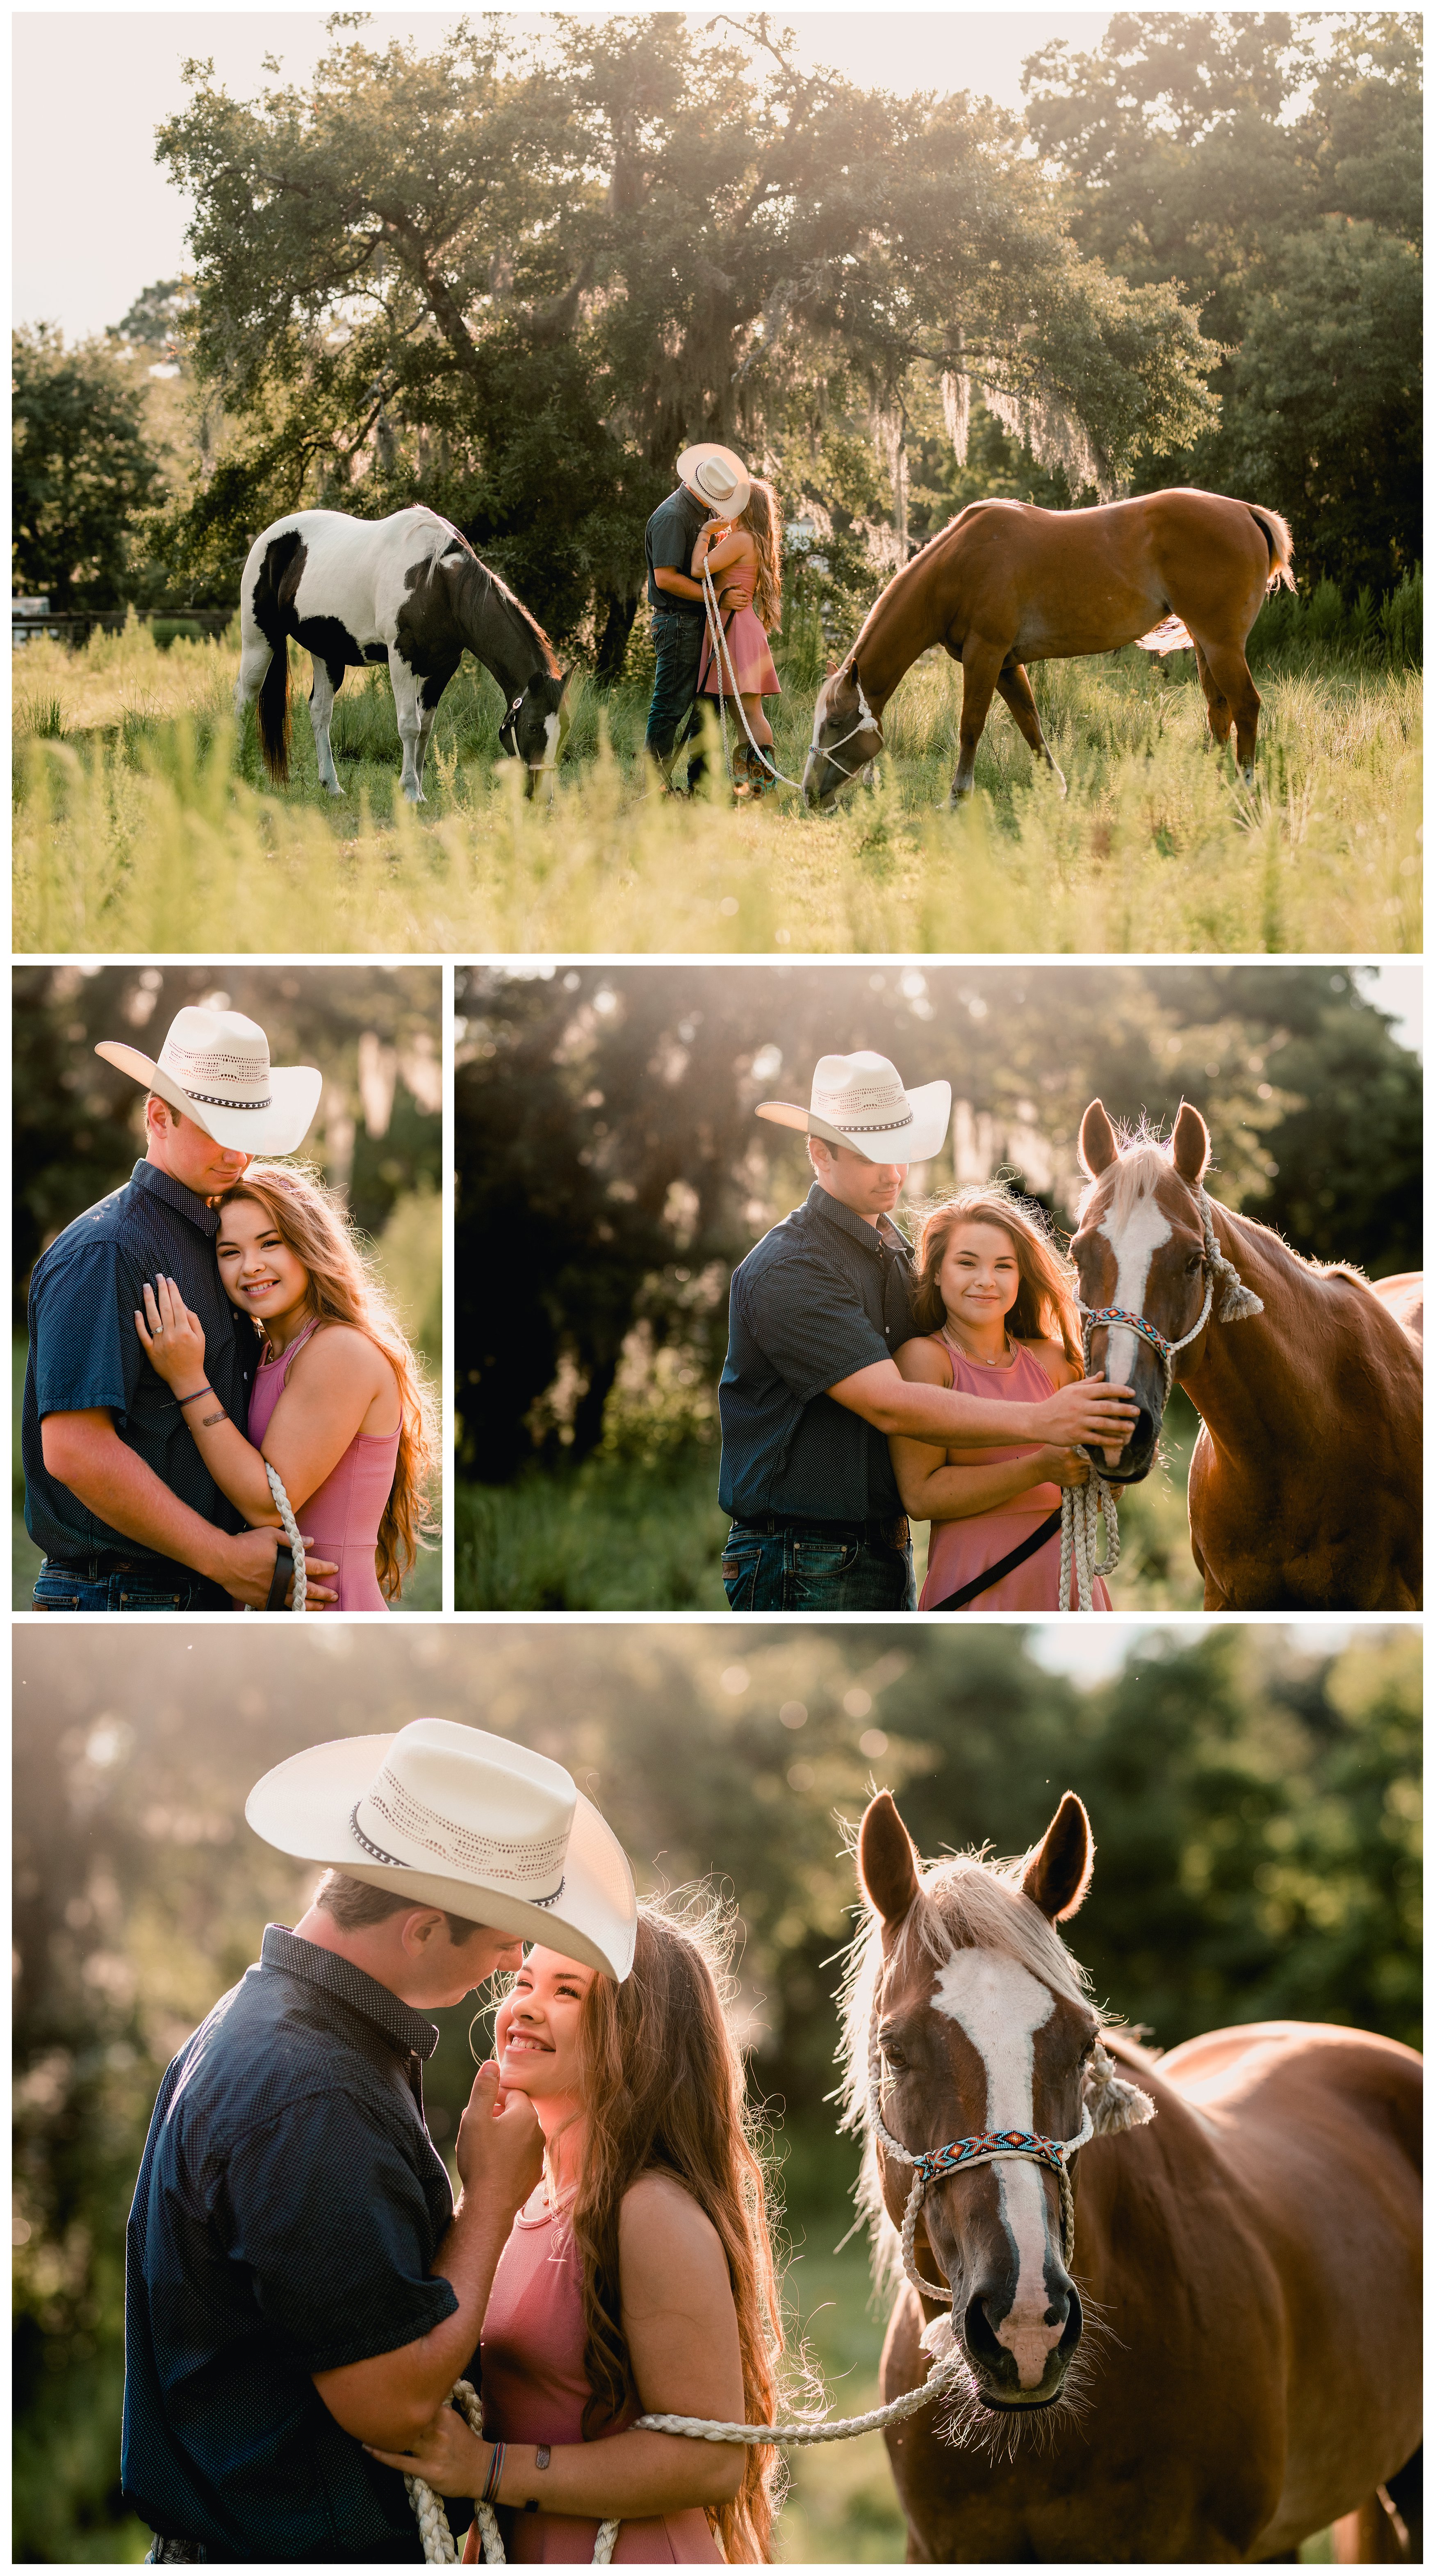 Cowboy and cowgirl engagement photos taken with their horses in Jacksonville, Fl.